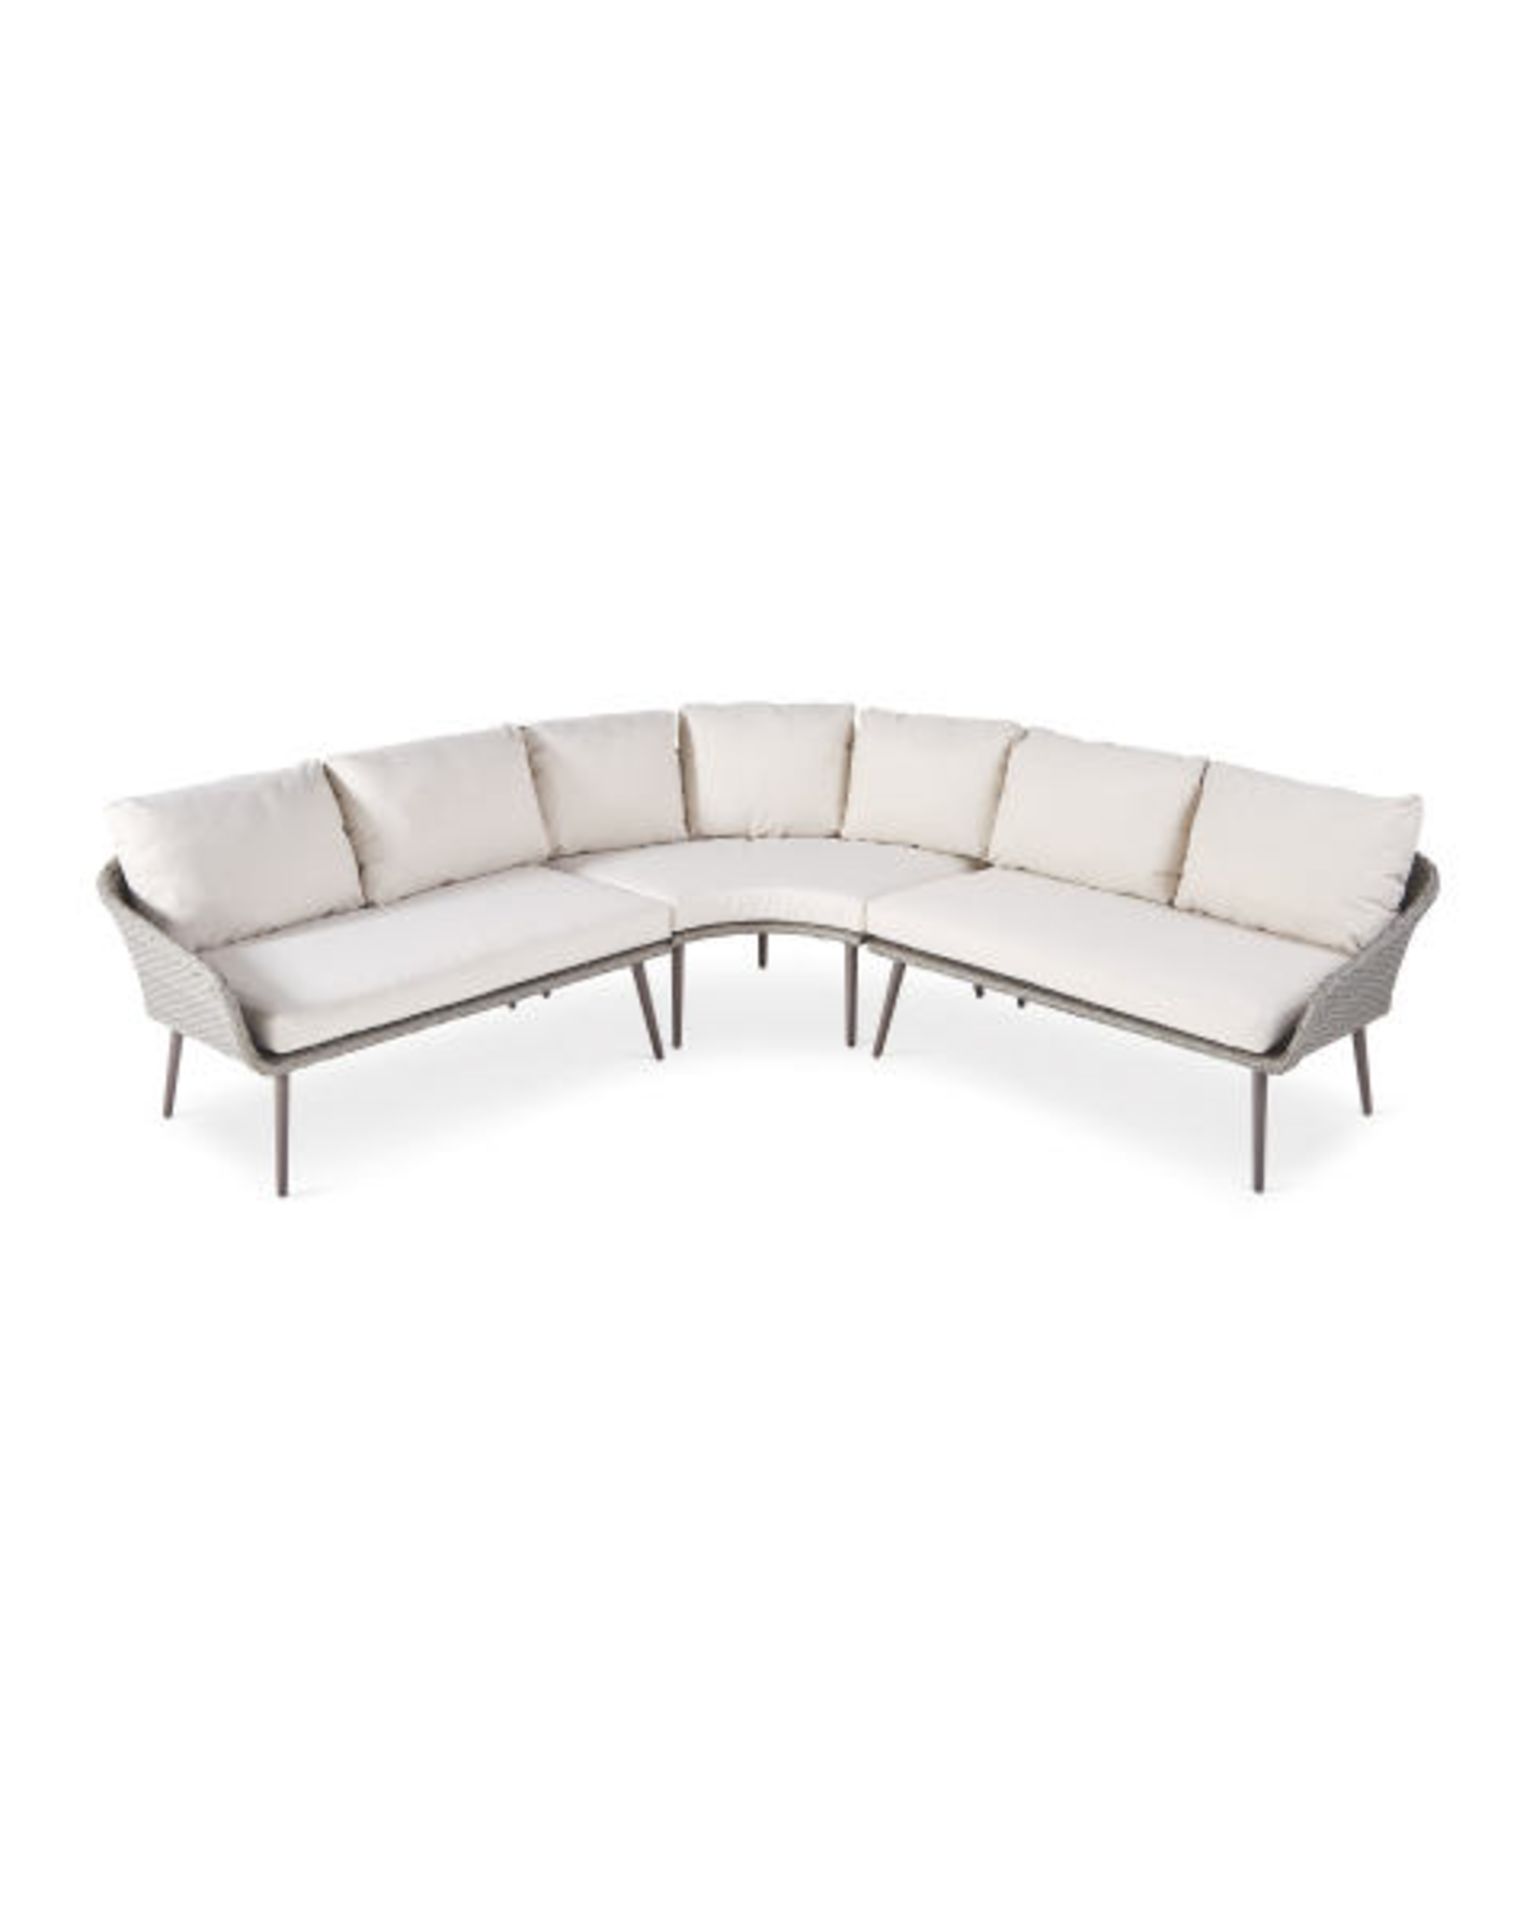 Multifunctional Lounge & Dining Corner Sofa Dining Set. Enjoy the warmer weather with this Luxury - Image 4 of 5